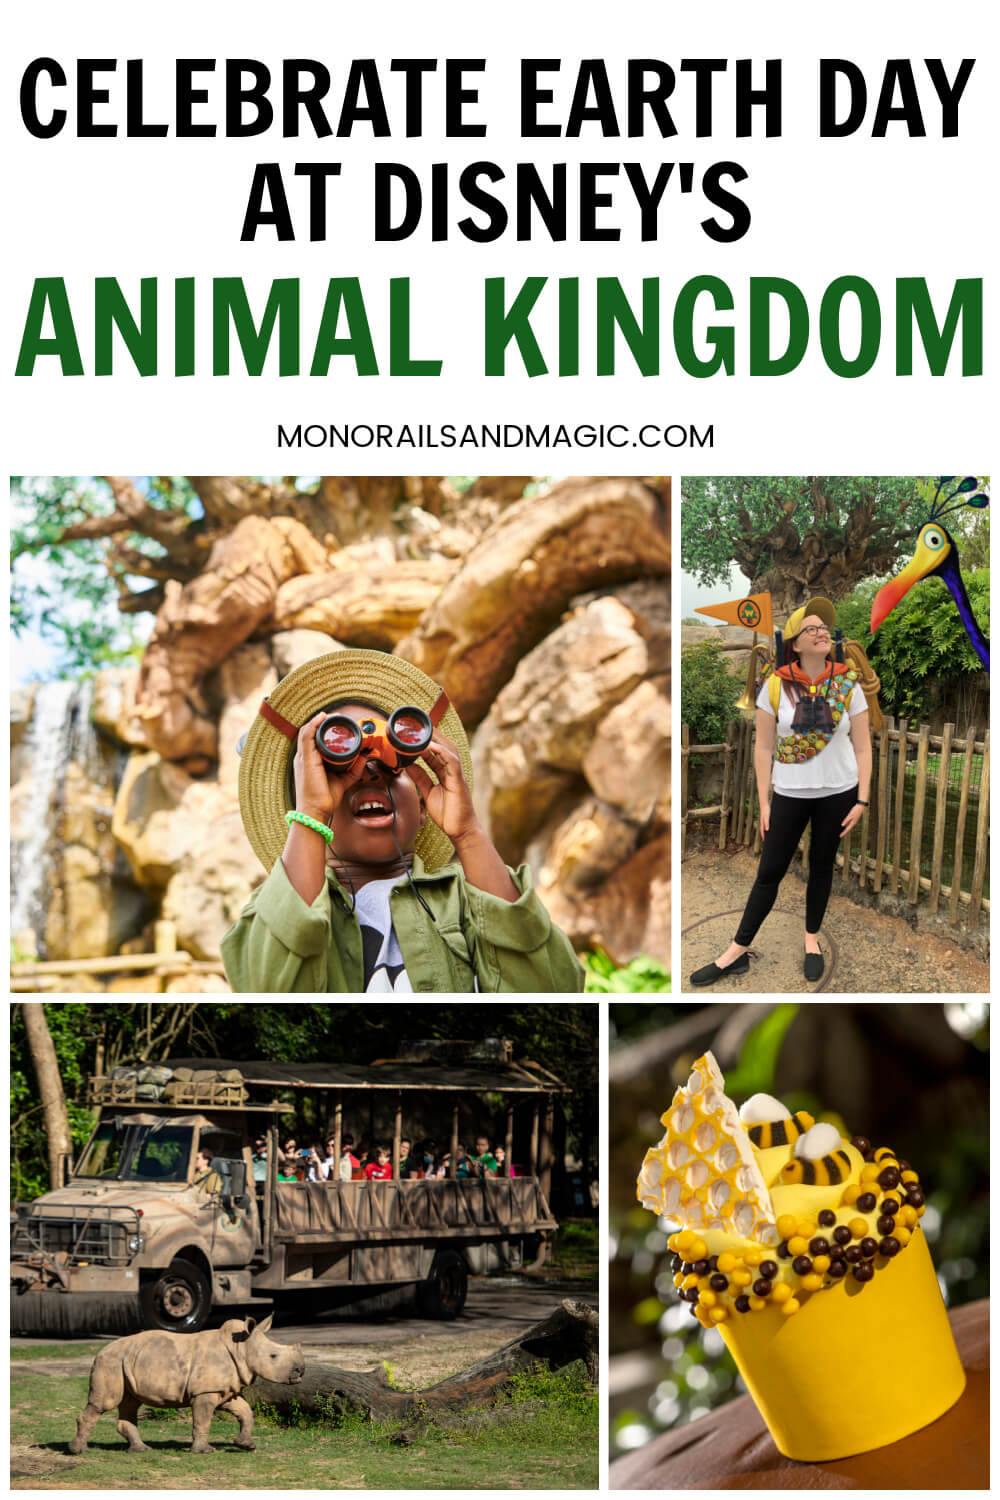 Different ways you can celebrate Earth Day at Disney's Animal Kingdom in 2022.